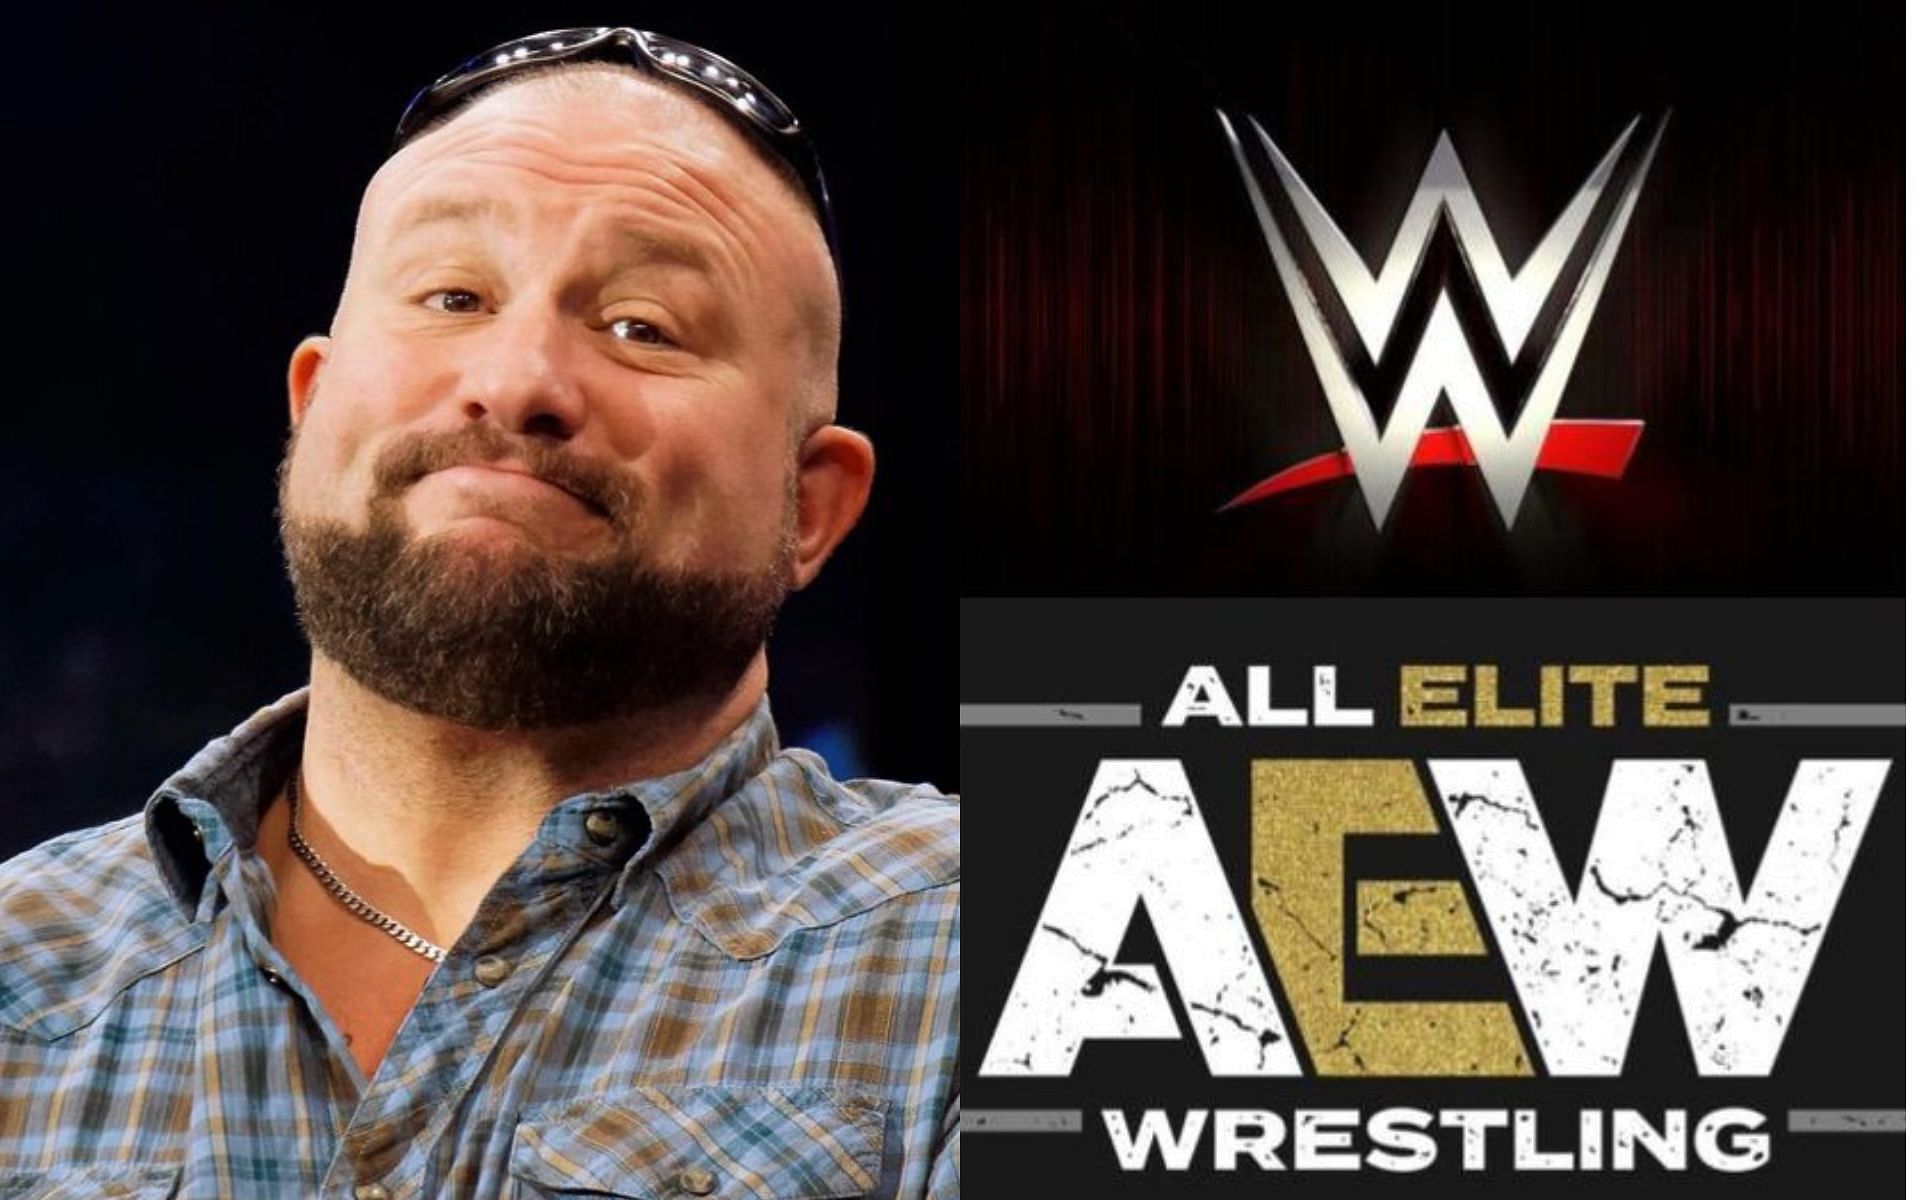 WWE Hall of Famer Bully Ray complimented an AEW Dynamite segment yesterday.